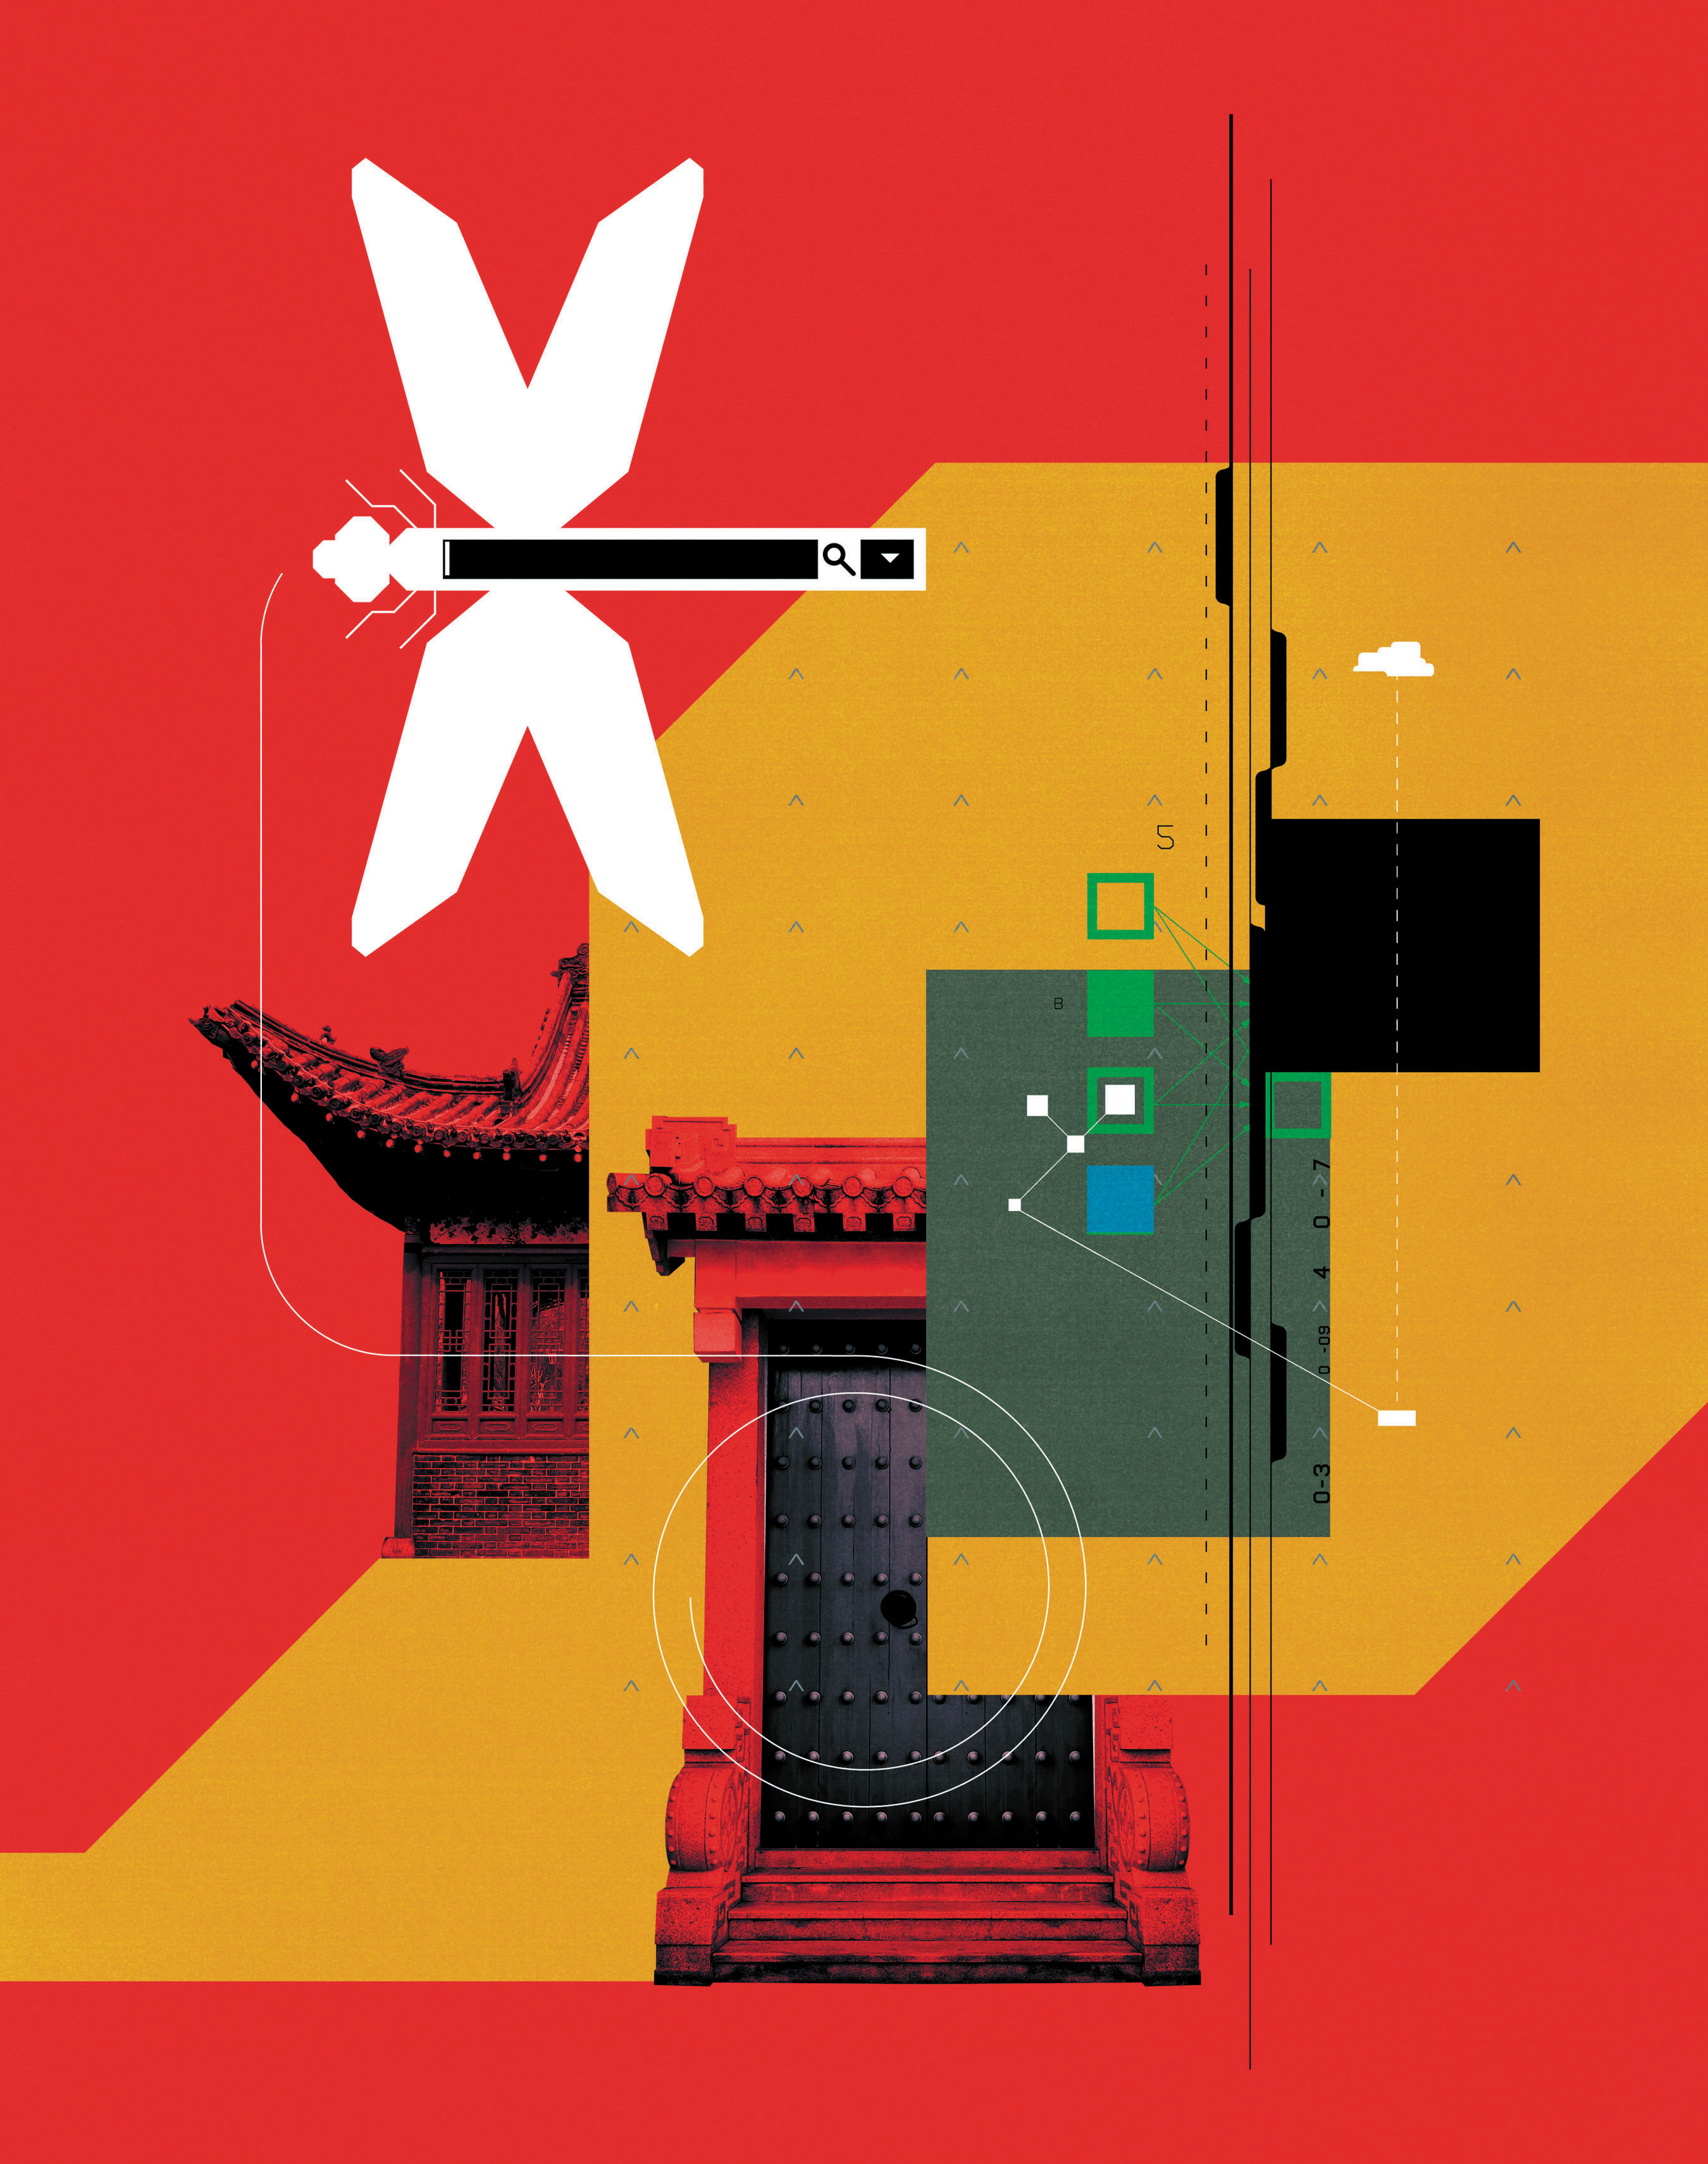 <b><a href="https://www.technologyreview.com/s/612601/how-google-took-on-china-and-lost/"_blank">How Google took on China—and lost</a></b> <br> Illustration by Stuart Bradford